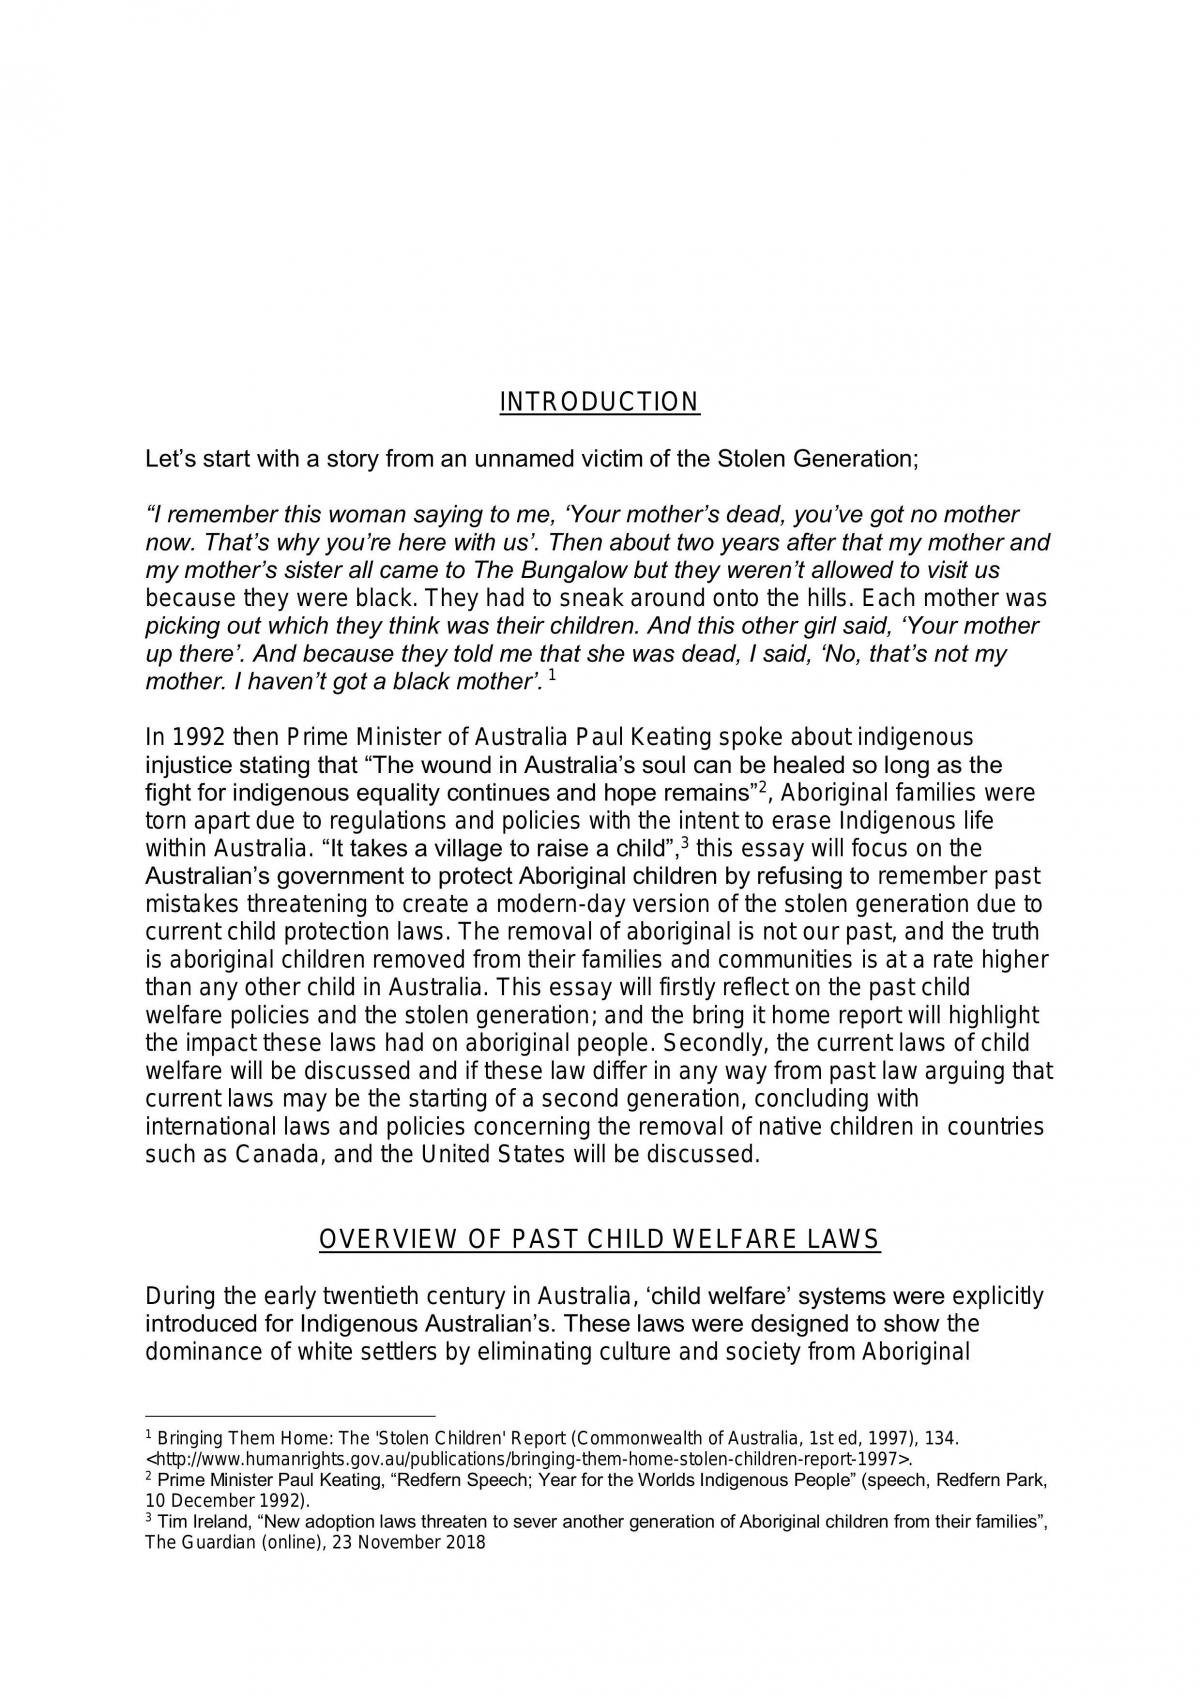 Children and the Law - Research Essay - Page 2